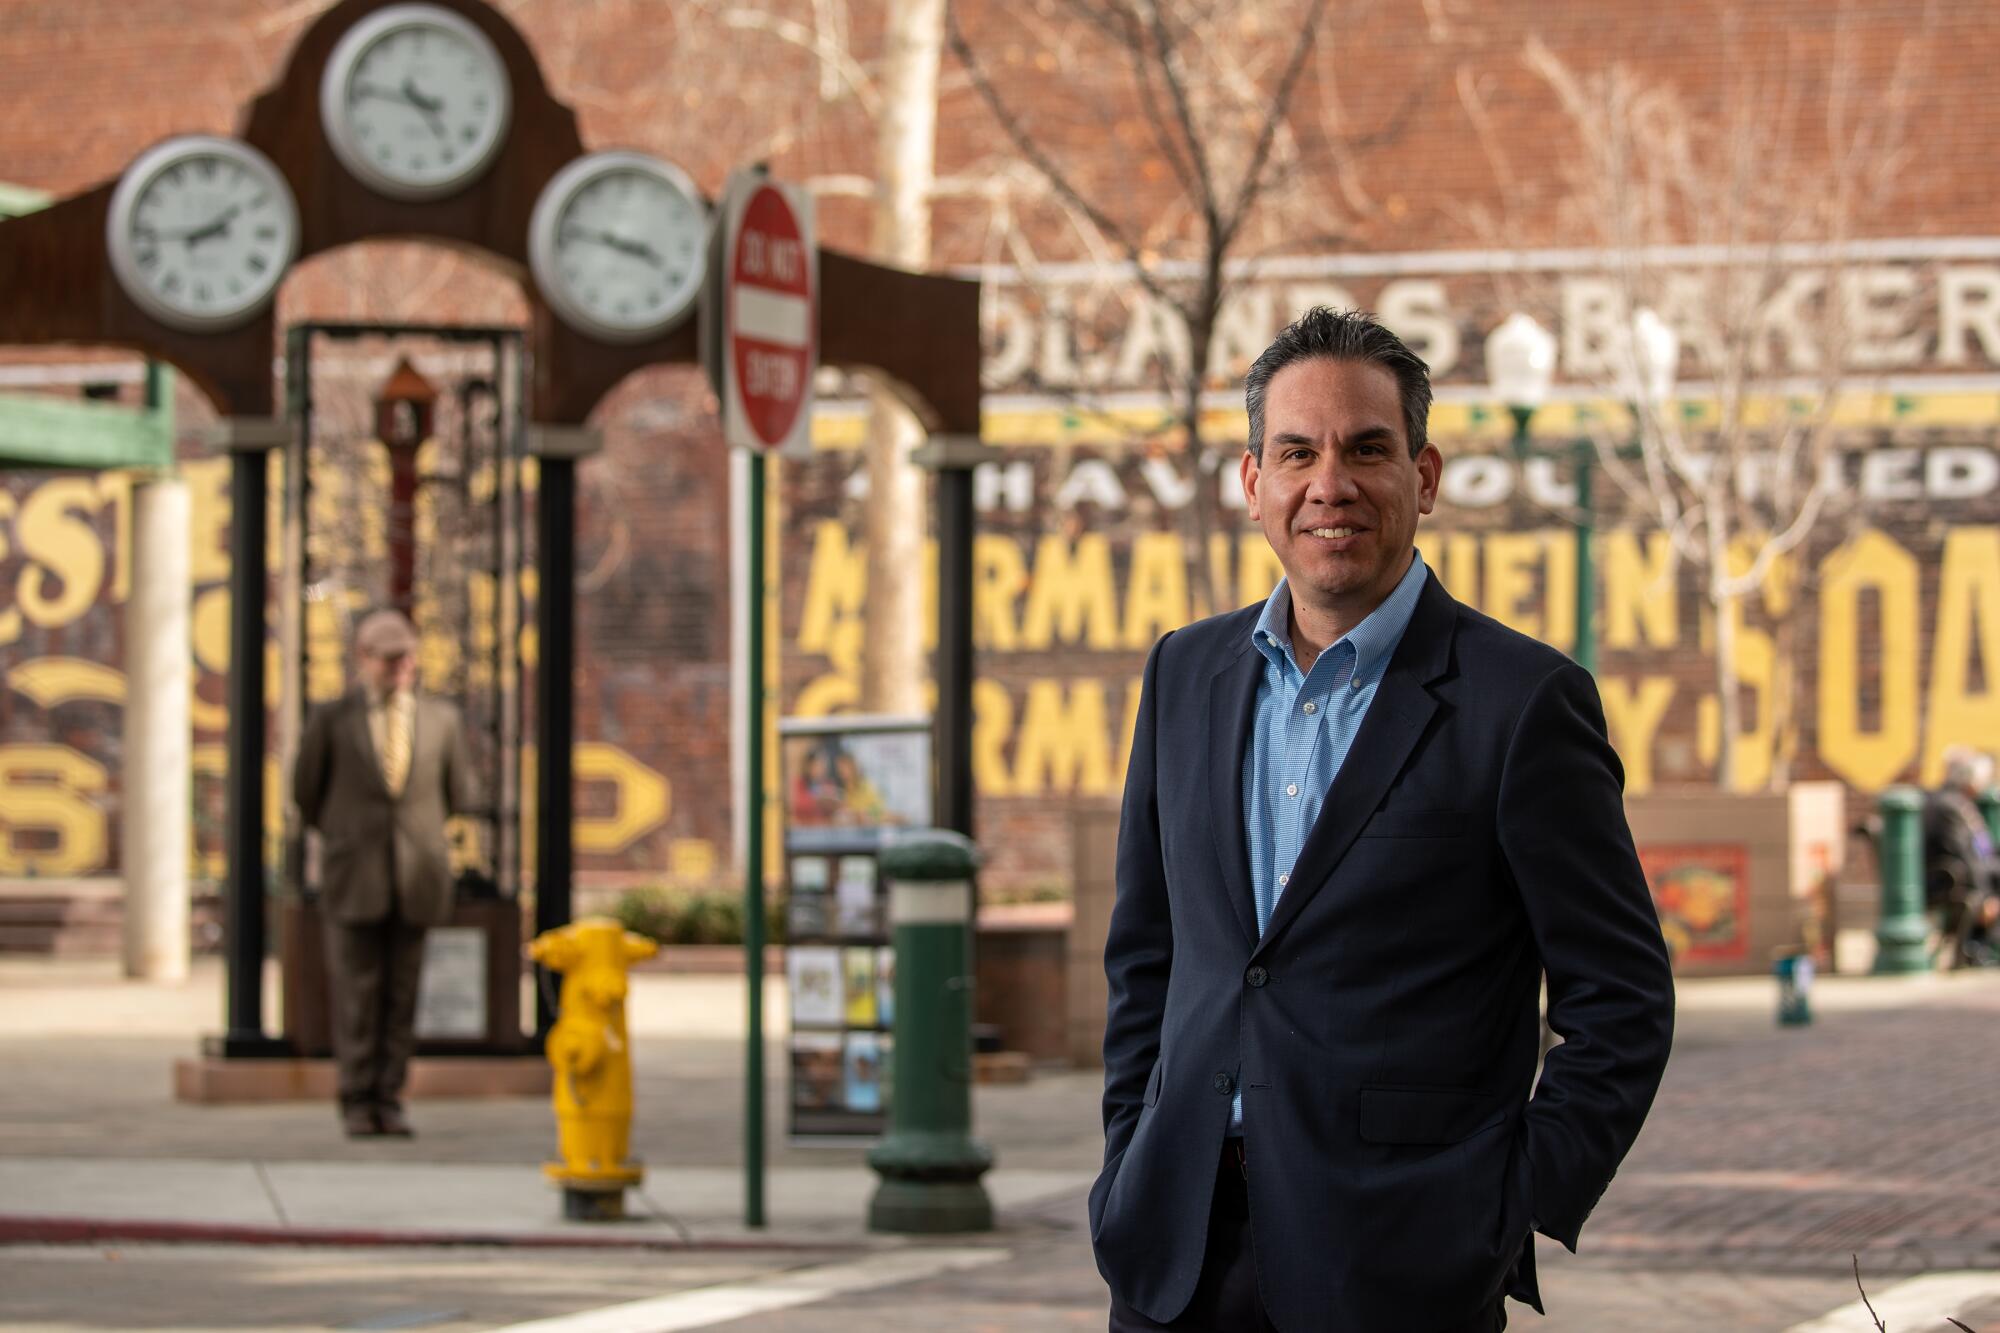 Rep. Pete Aguilar, stands for a portrait outdoors, with a street scene behind him.